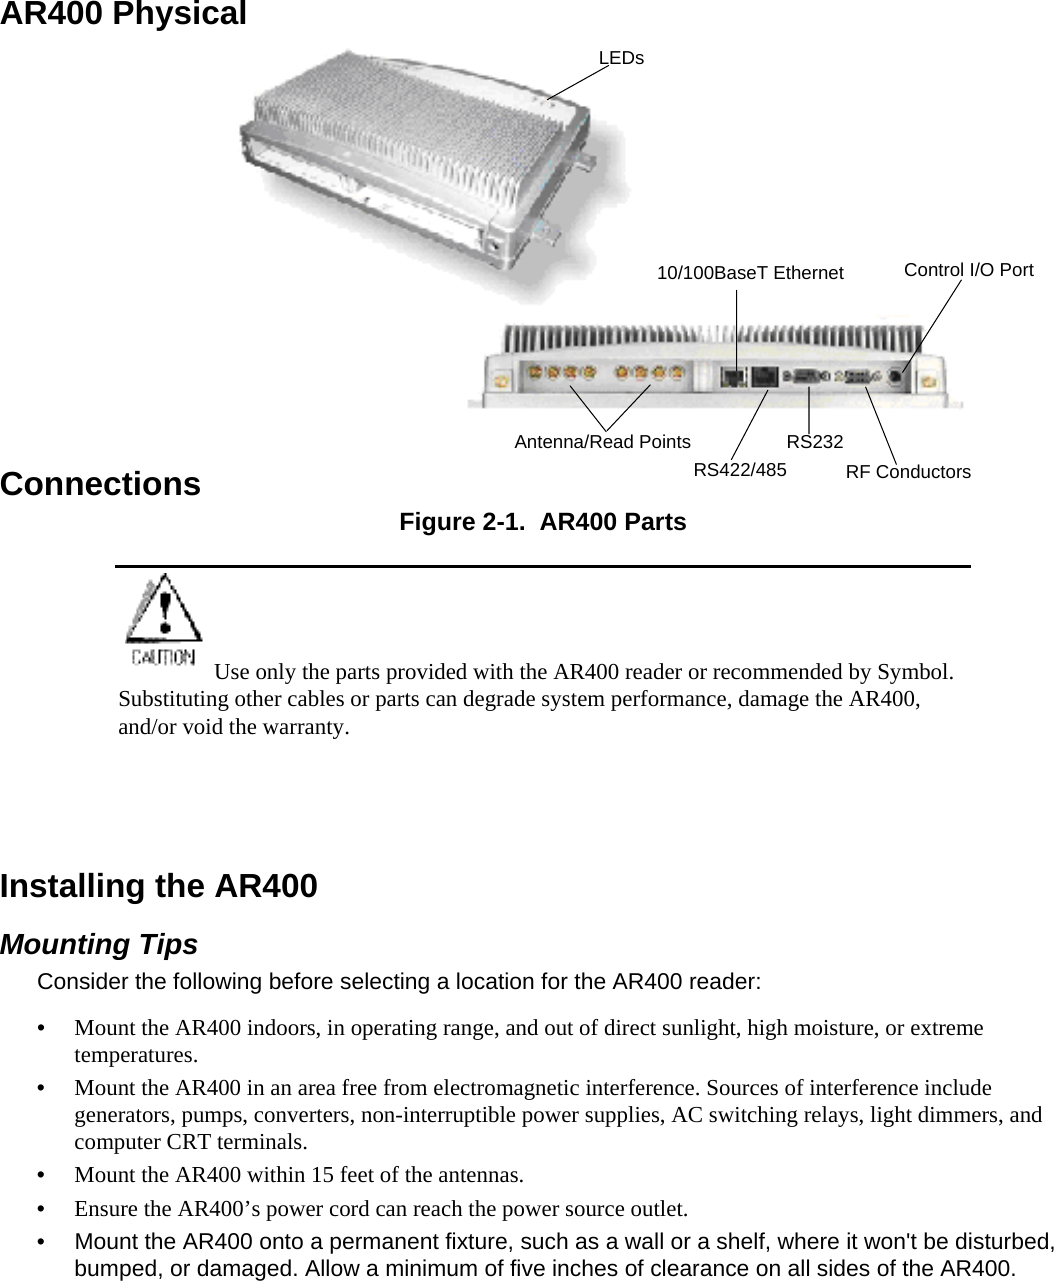  AR400 Physical ConnectionsAntenna/Read PointsRS422/48510/100BaseT EthernetRS232Control I/O PortRF ConductorsLEDs Figure 2-1.  AR400 Parts Use only the parts provided with the AR400 reader or recommended by Symbol. Substituting other cables or parts can degrade system performance, damage the AR400, and/or void the warranty.   Installing the AR400 Mounting Tips Consider the following before selecting a location for the AR400 reader: •  Mount the AR400 indoors, in operating range, and out of direct sunlight, high moisture, or extreme temperatures. •  Mount the AR400 in an area free from electromagnetic interference. Sources of interference include generators, pumps, converters, non-interruptible power supplies, AC switching relays, light dimmers, and computer CRT terminals. •  Mount the AR400 within 15 feet of the antennas. •  Ensure the AR400’s power cord can reach the power source outlet. •  Mount the AR400 onto a permanent fixture, such as a wall or a shelf, where it won&apos;t be disturbed, bumped, or damaged. Allow a minimum of five inches of clearance on all sides of the AR400. 